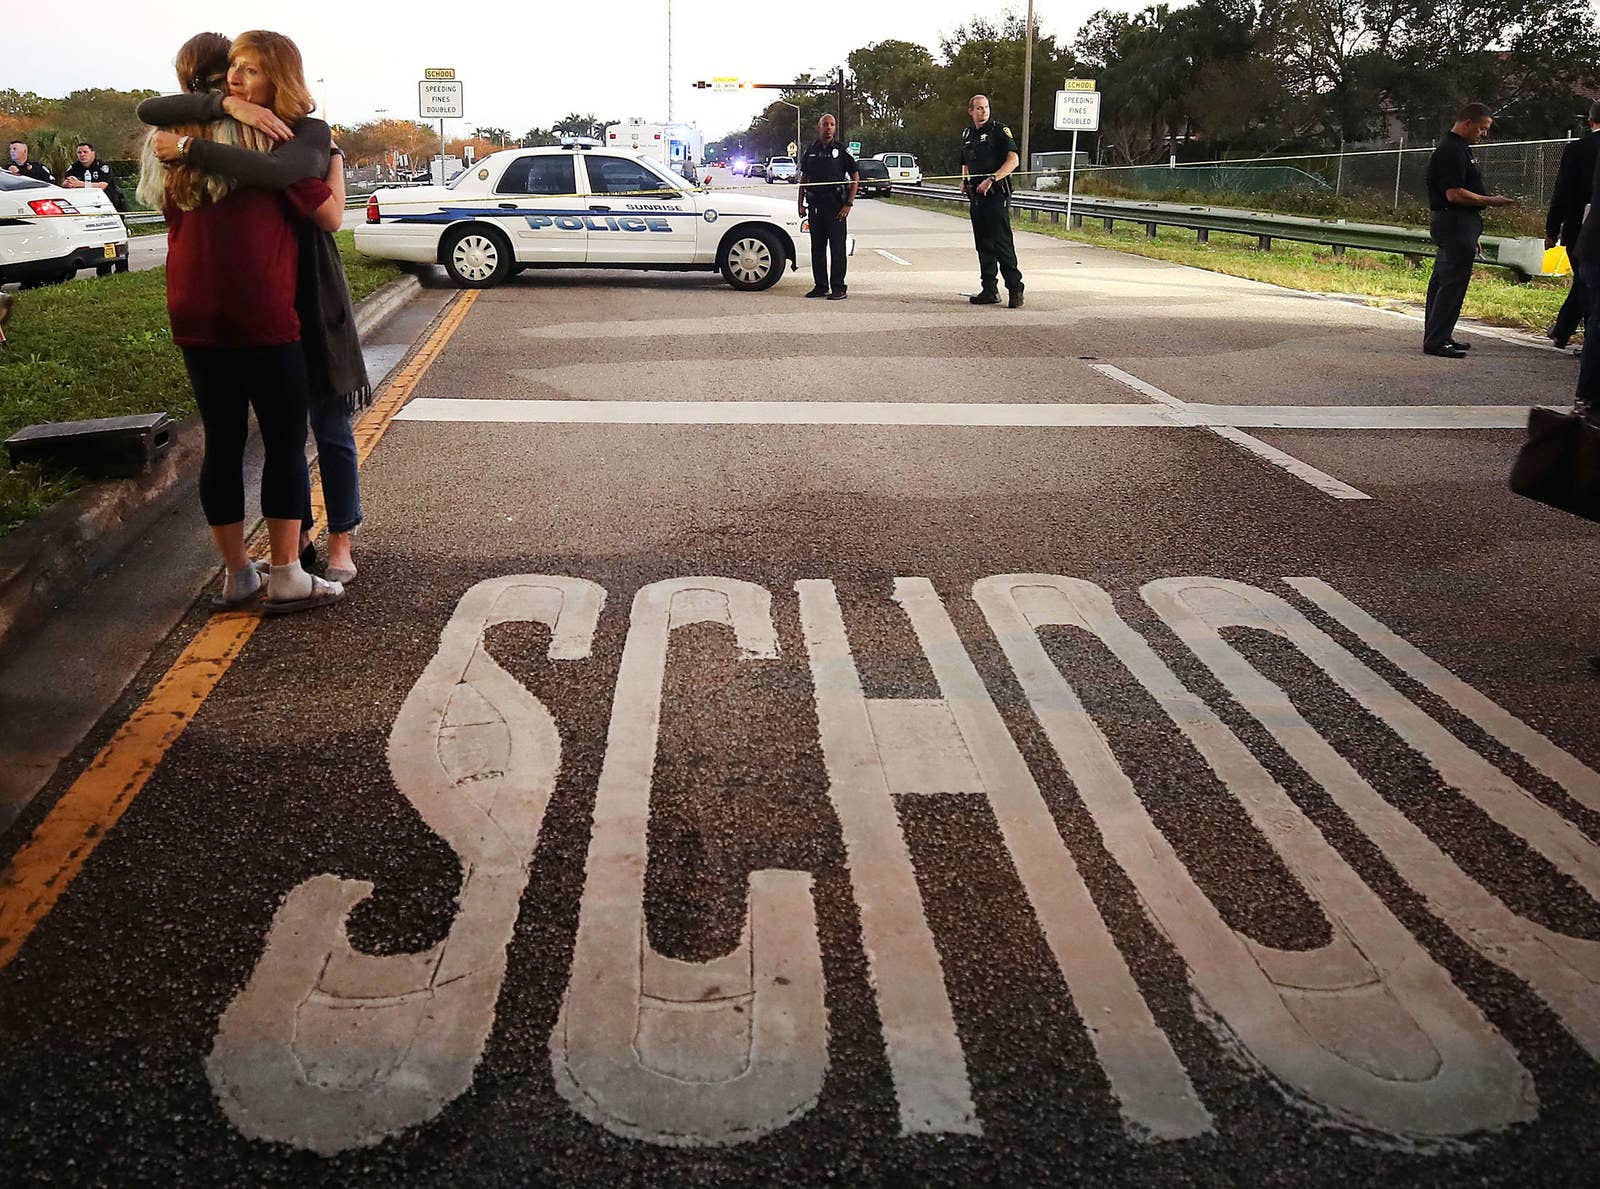 Kristi Gilroy (right) hugs a young woman at a police checkpoint near the Marjory Stoneman Douglas High School on Feb. 15, the day after 17 people were killed by a shooter at the Parkland, Florida, school. Police arrested the suspect after a short manhunt.